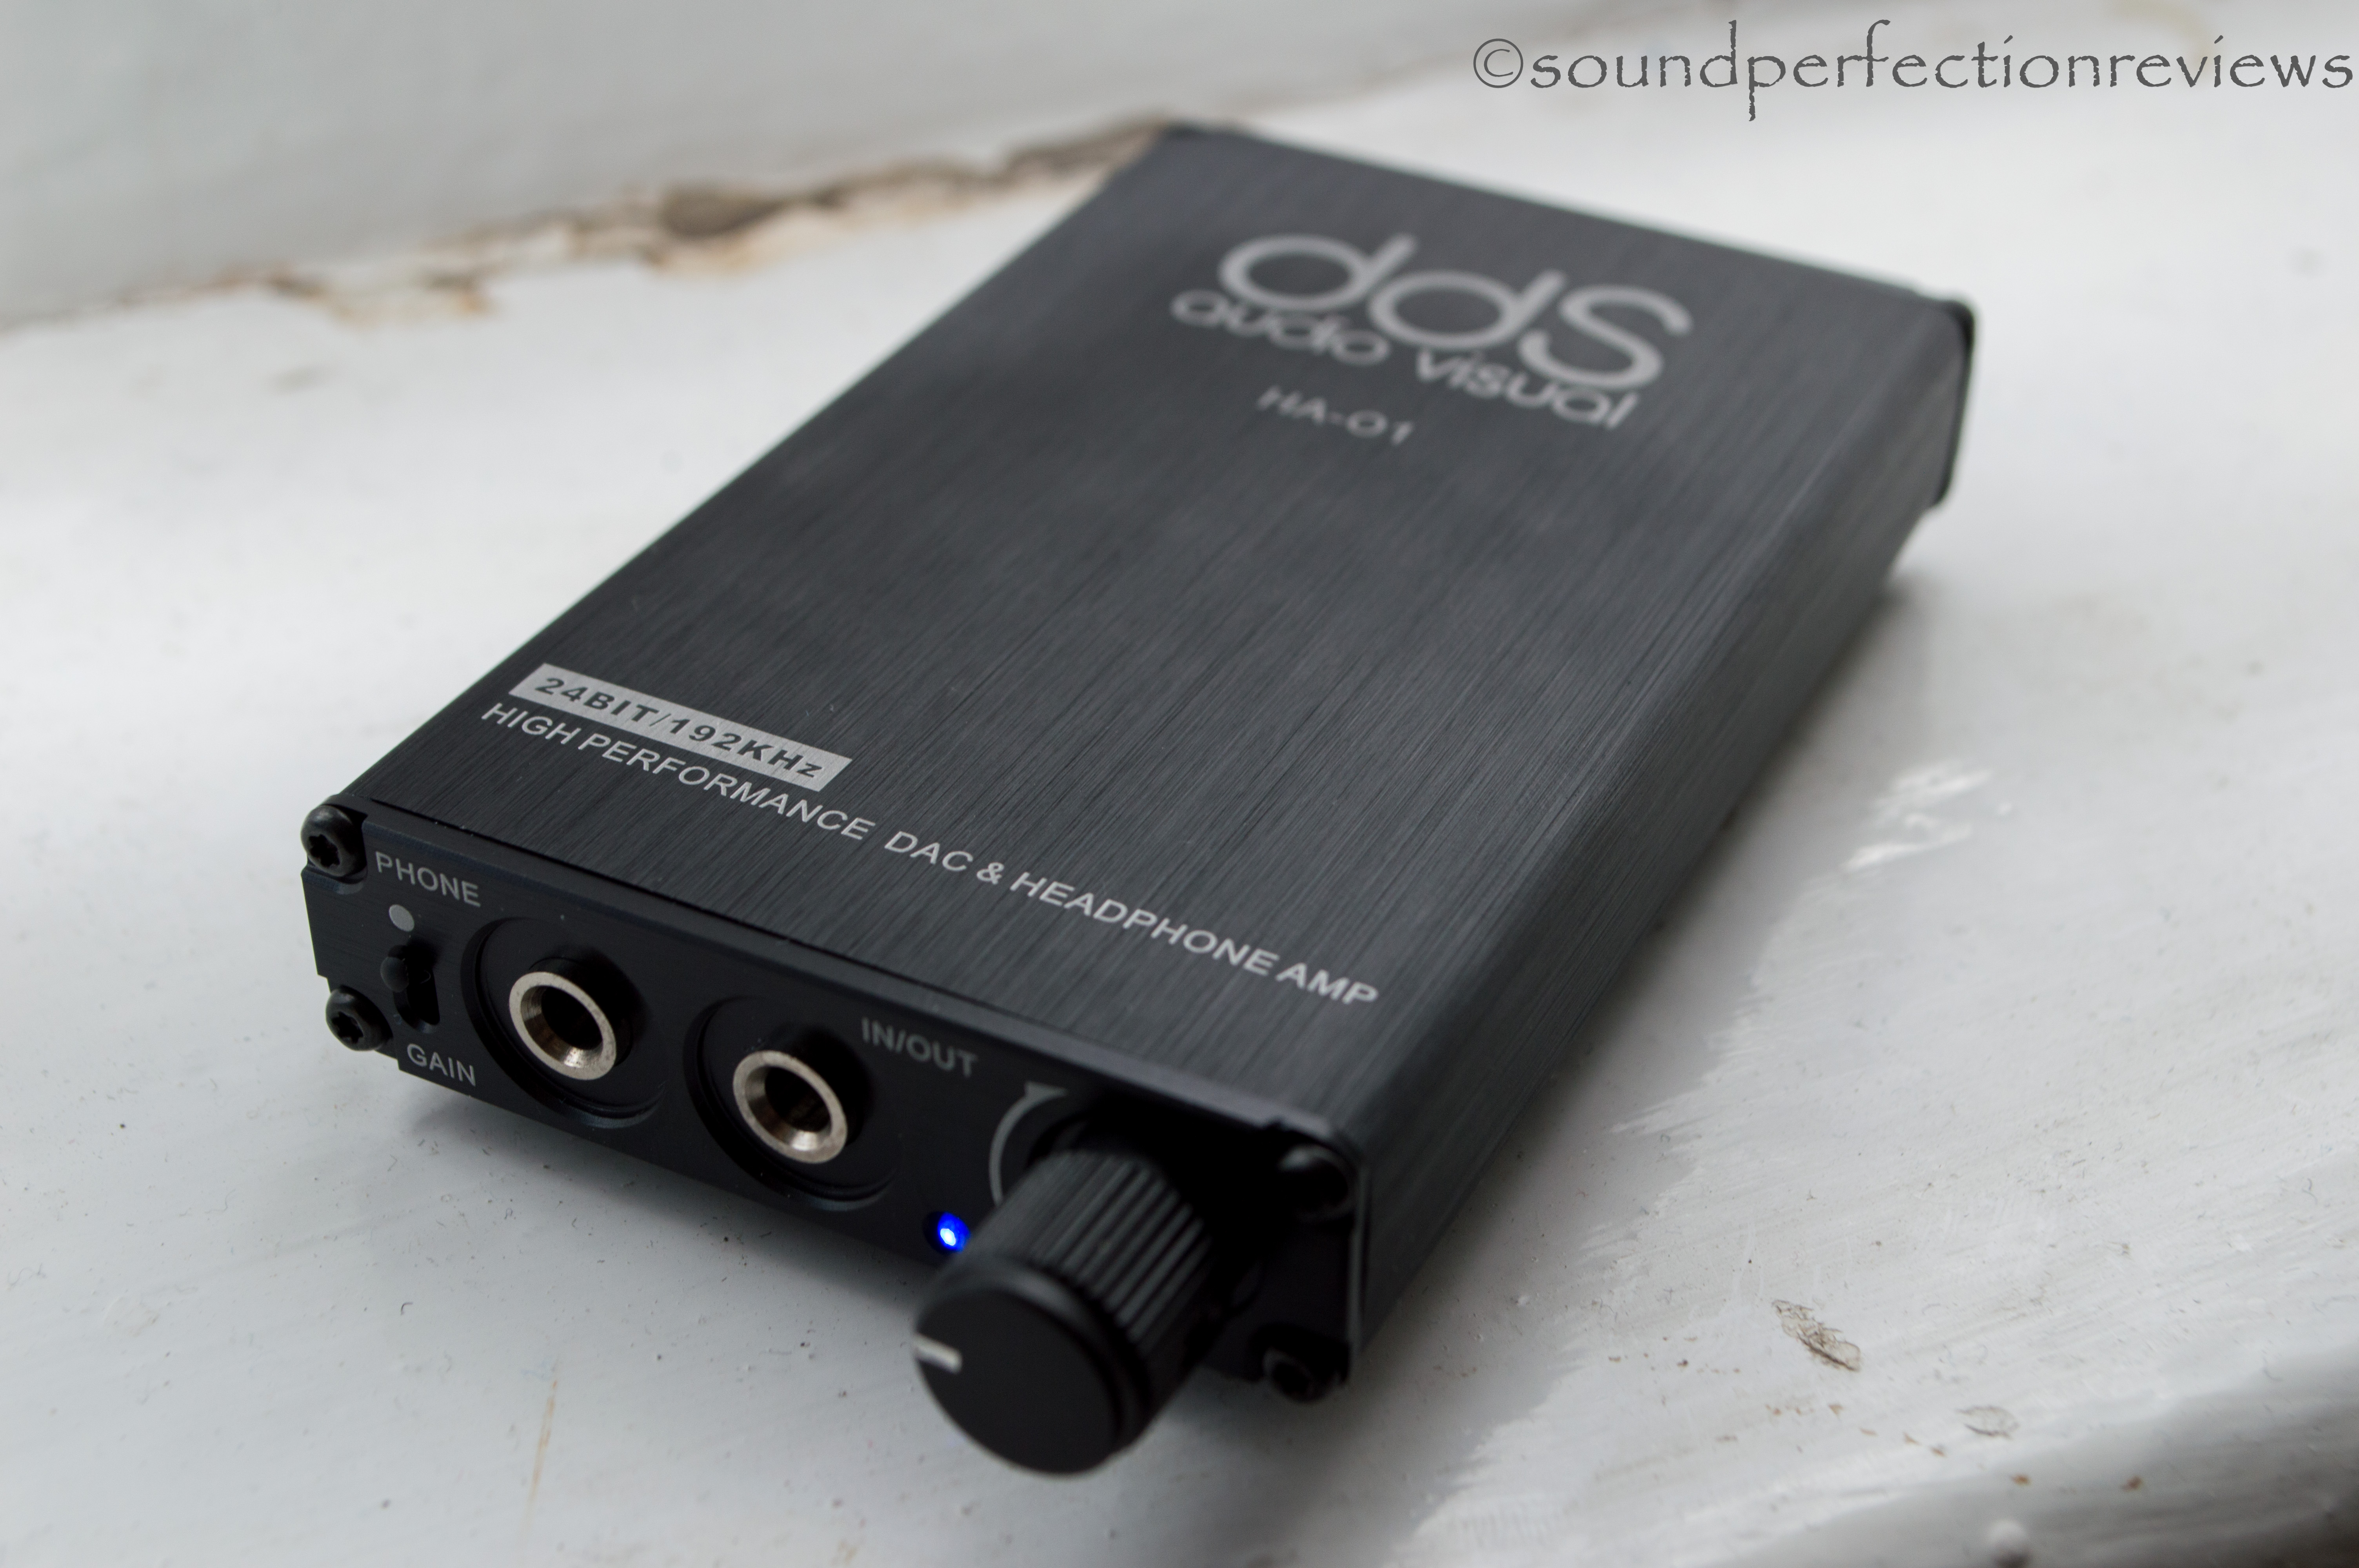 Review: DDS HA-01 a superbly versatile portable DAC/Amp